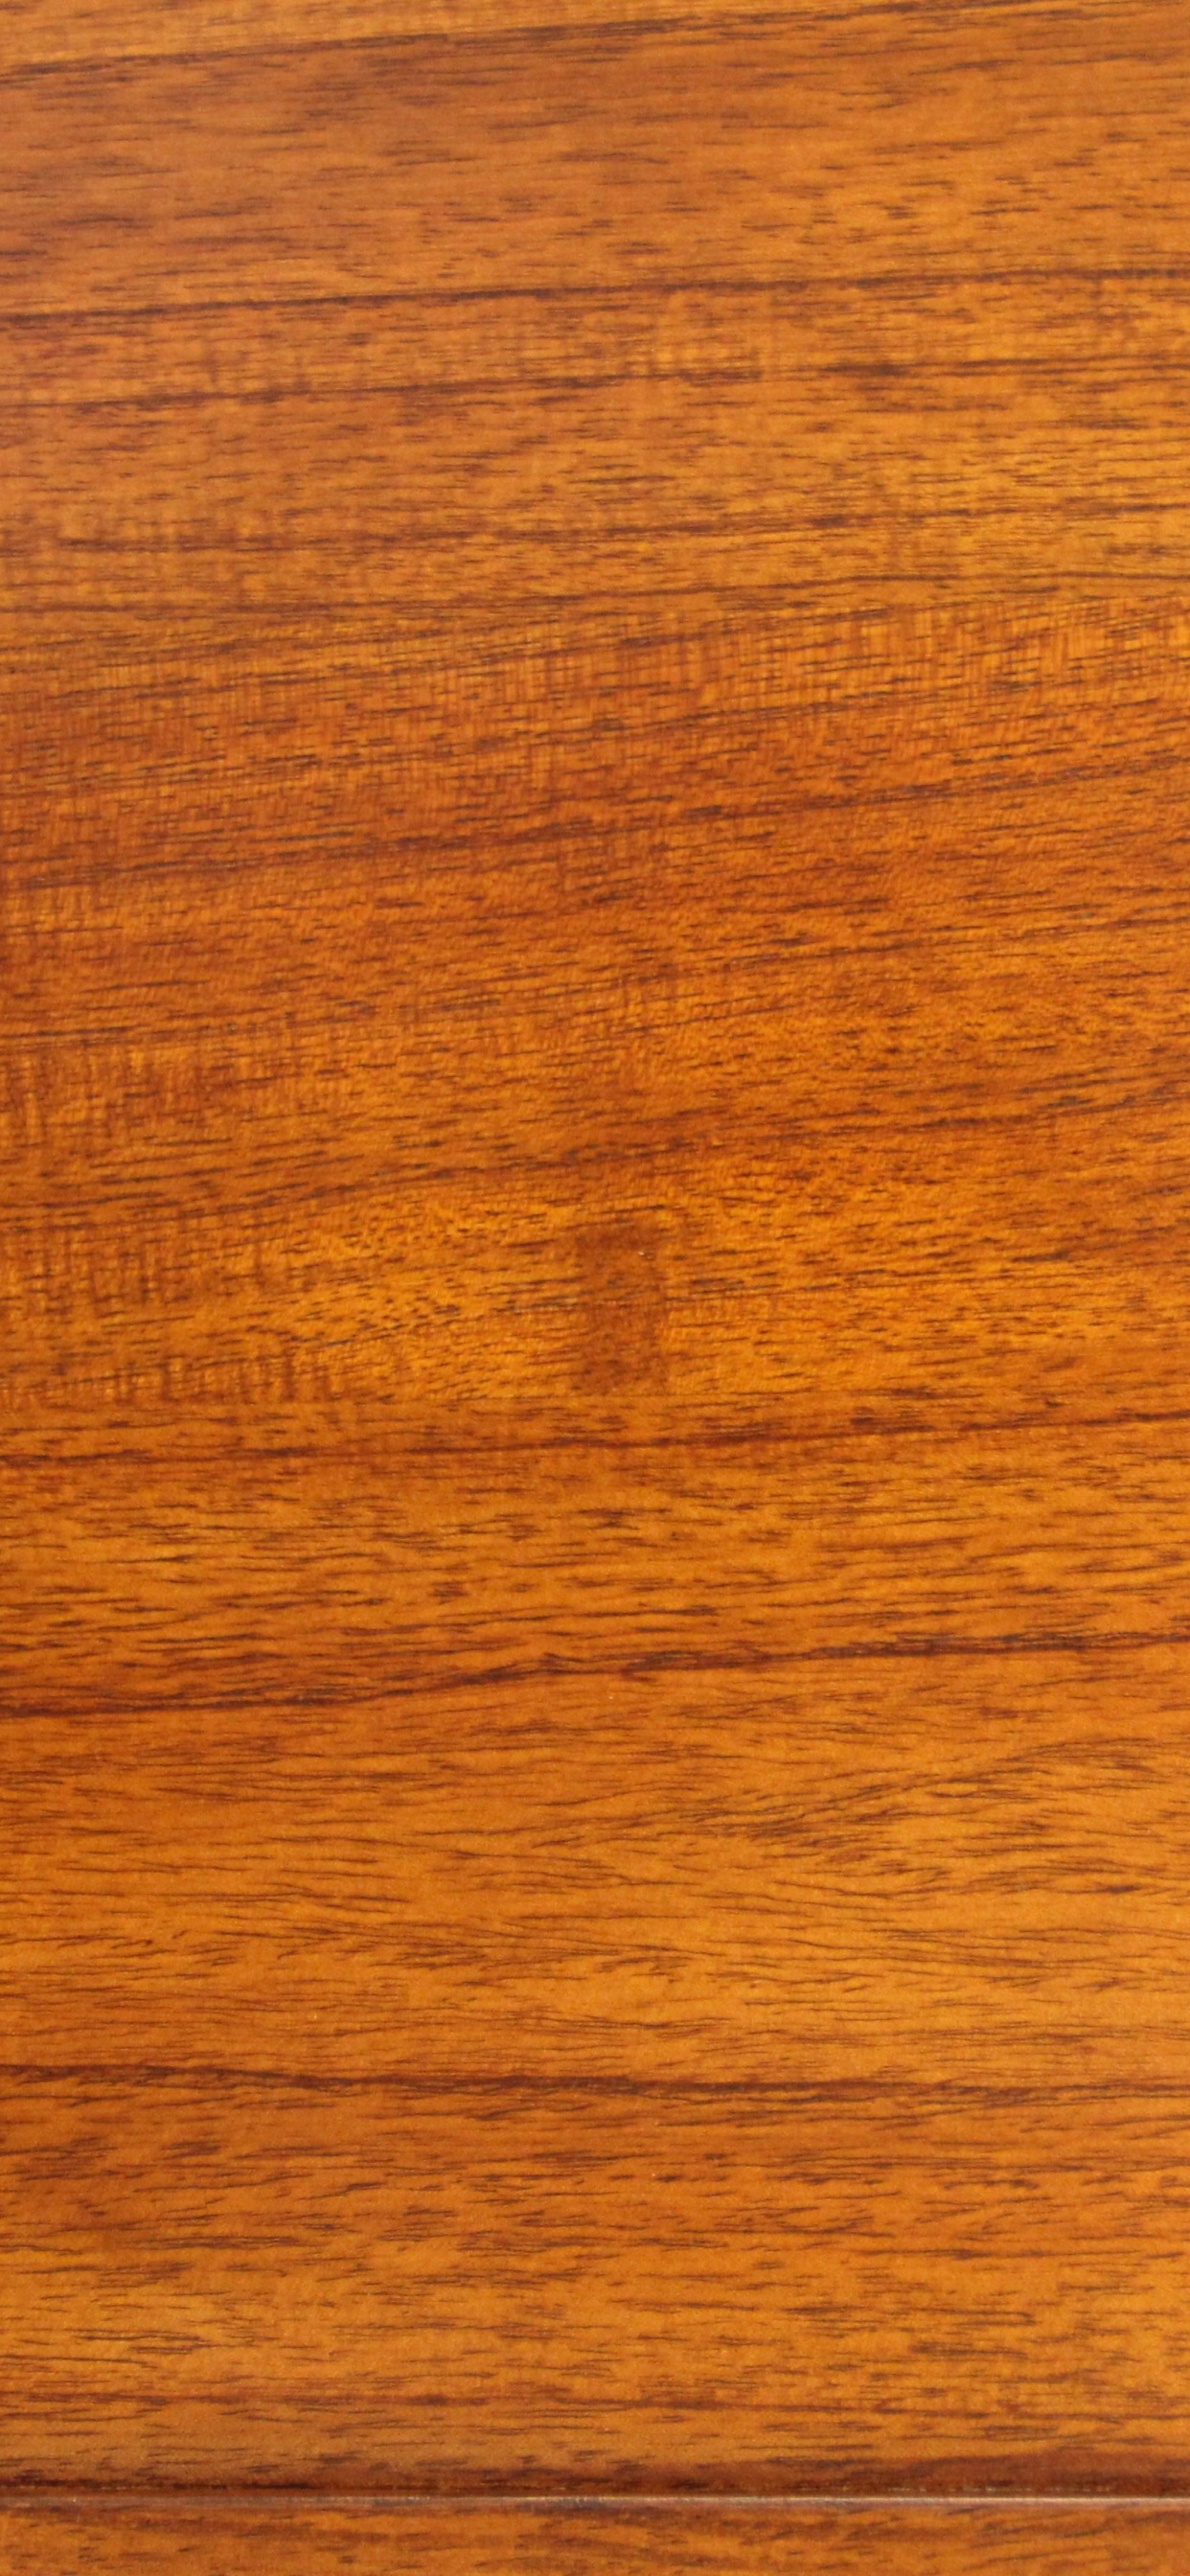 Brown Wooden Table With White Paper. Wallpaper in 1242x2688 Resolution